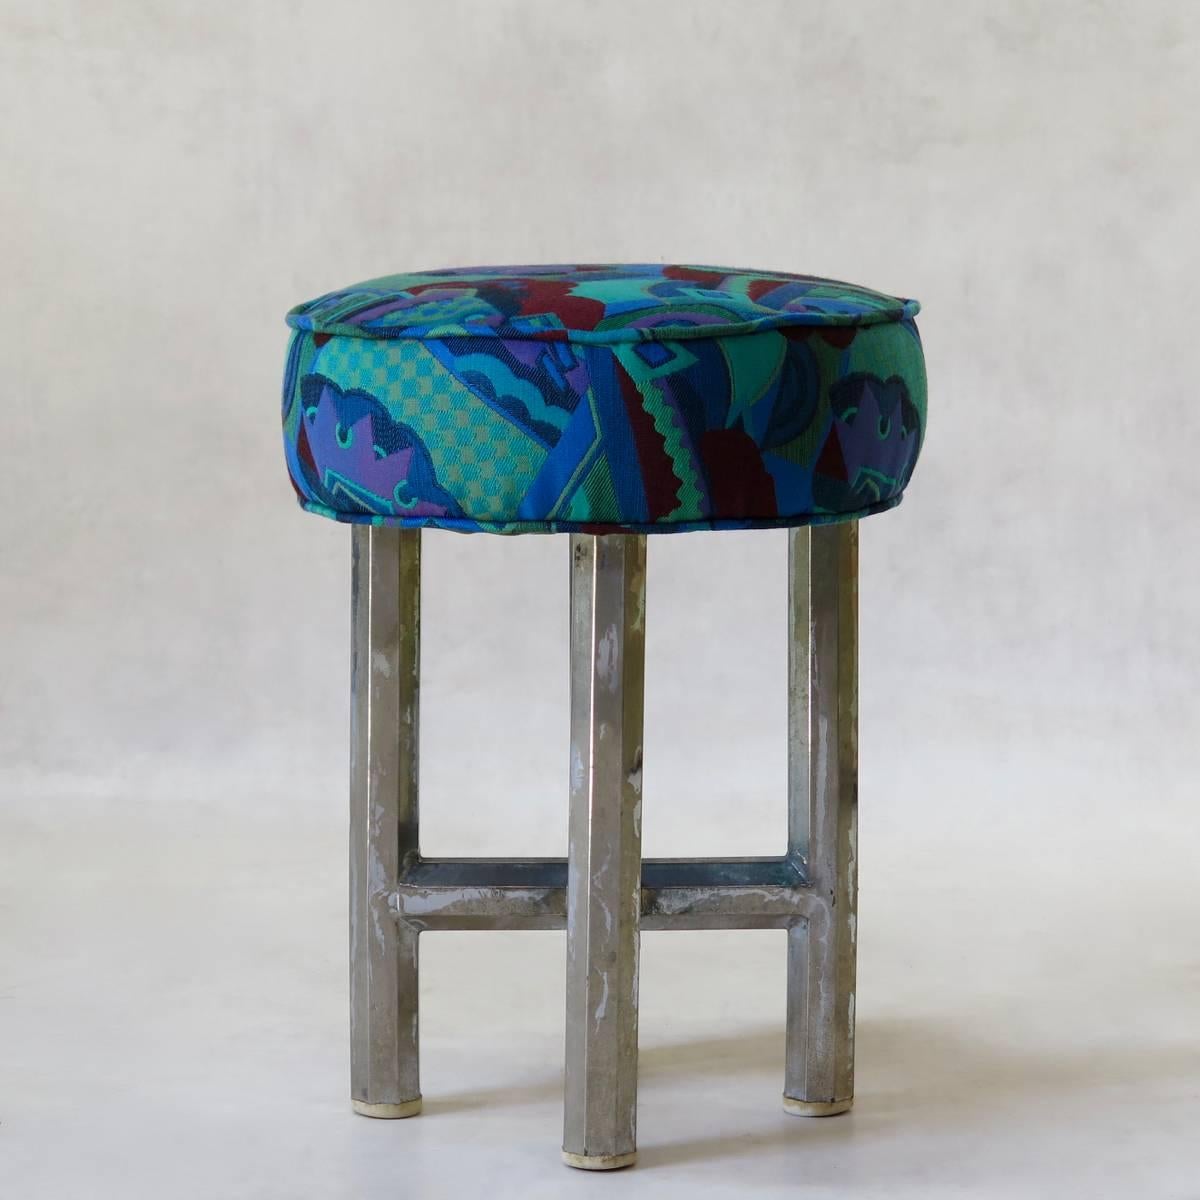 Compact but heavy Bauhaus stool raised on four chromed metal legs. The legs are octagonal and joined by an X-shape stretcher. Round seat upholstered in vibrant Art Deco fabric.